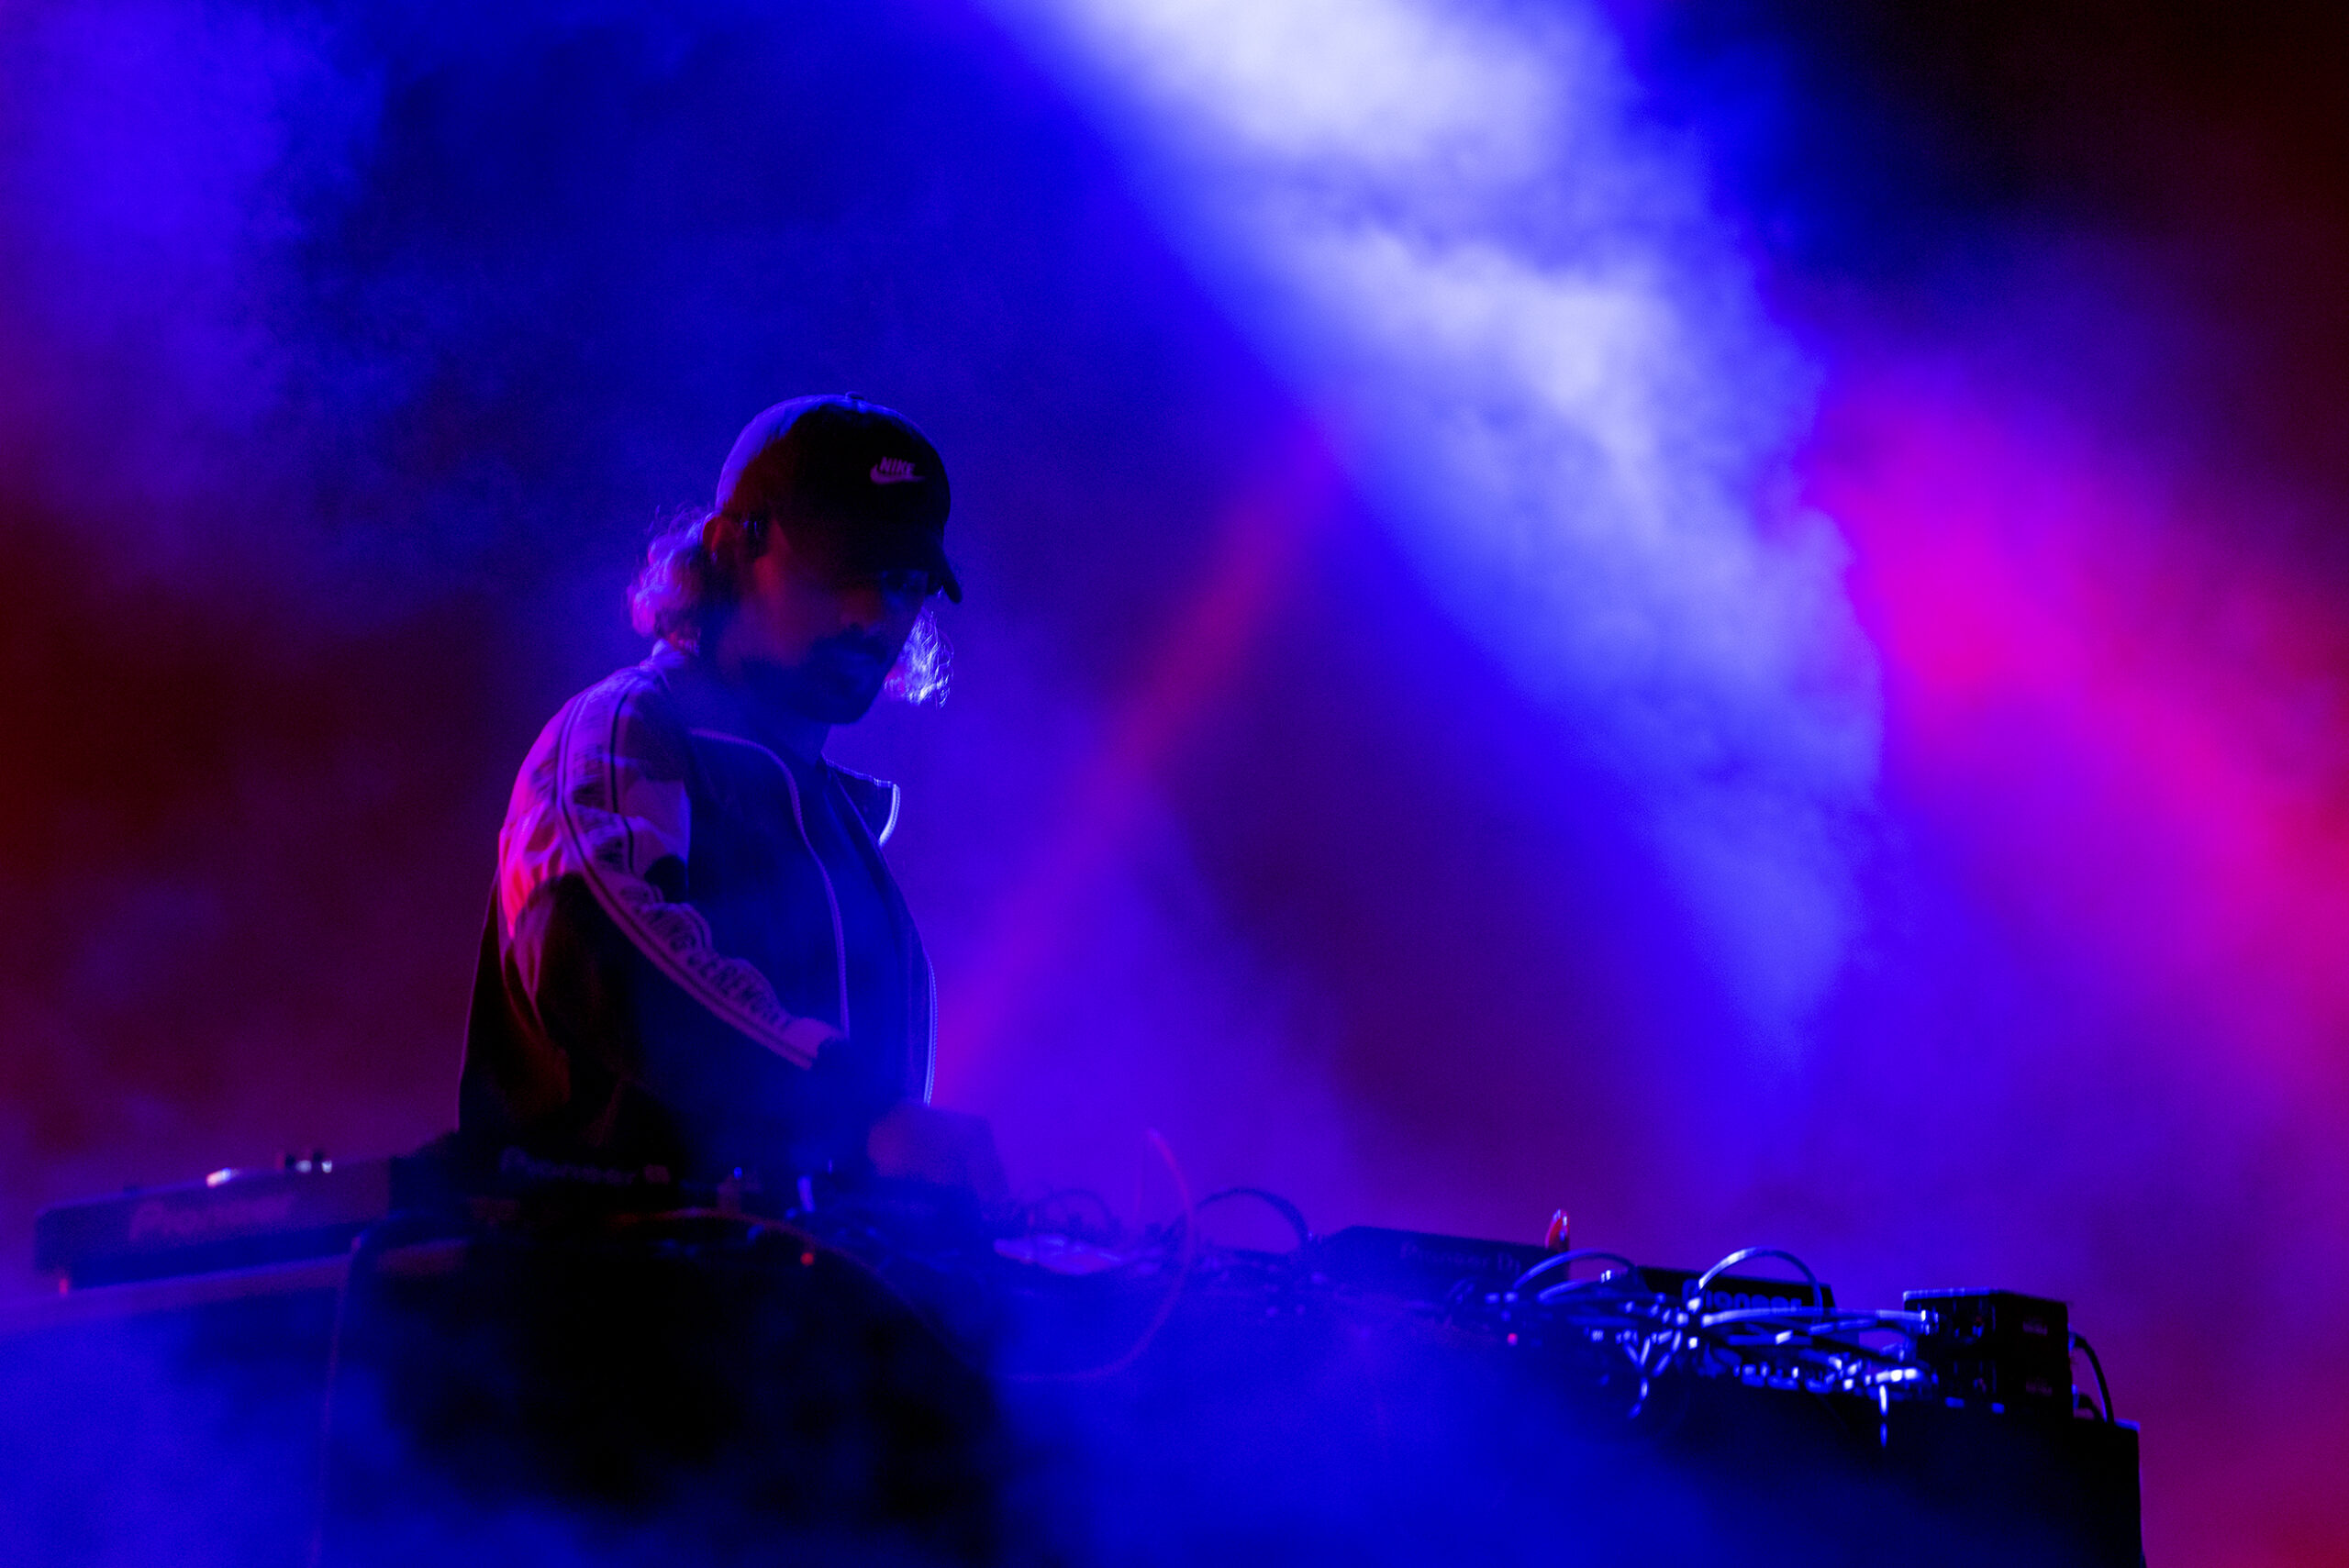 Blue and purple light catches the smoke surrounding a DJ as he plays a set.